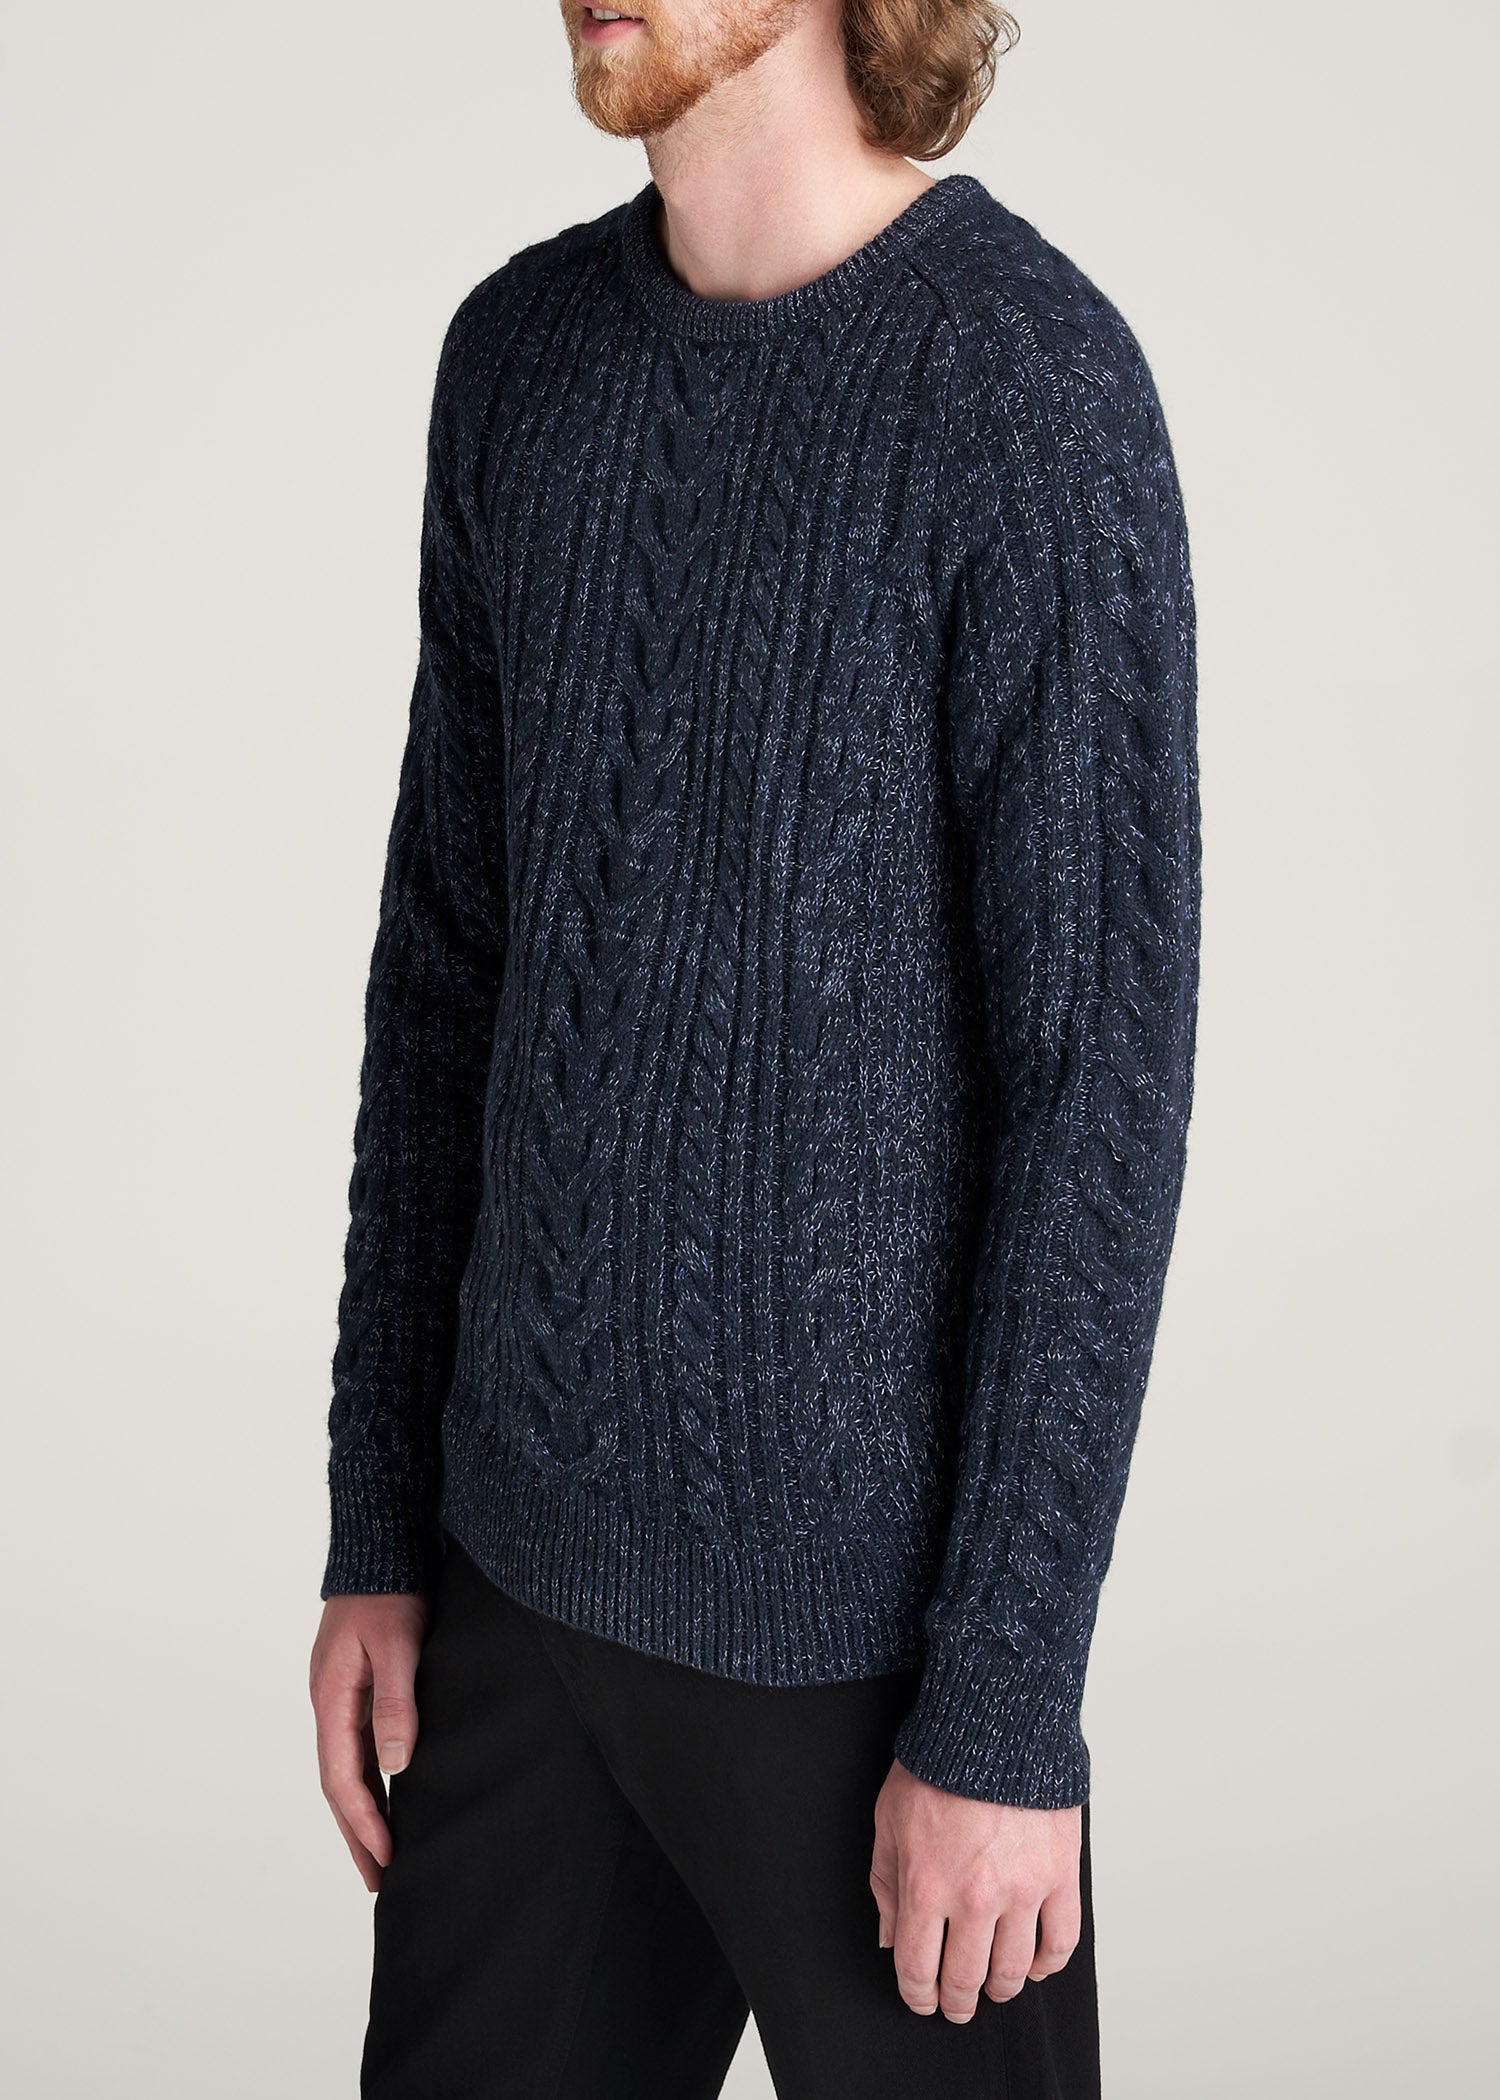 Men's Tall Sweaters | Tall Sweater for Men | American Tall